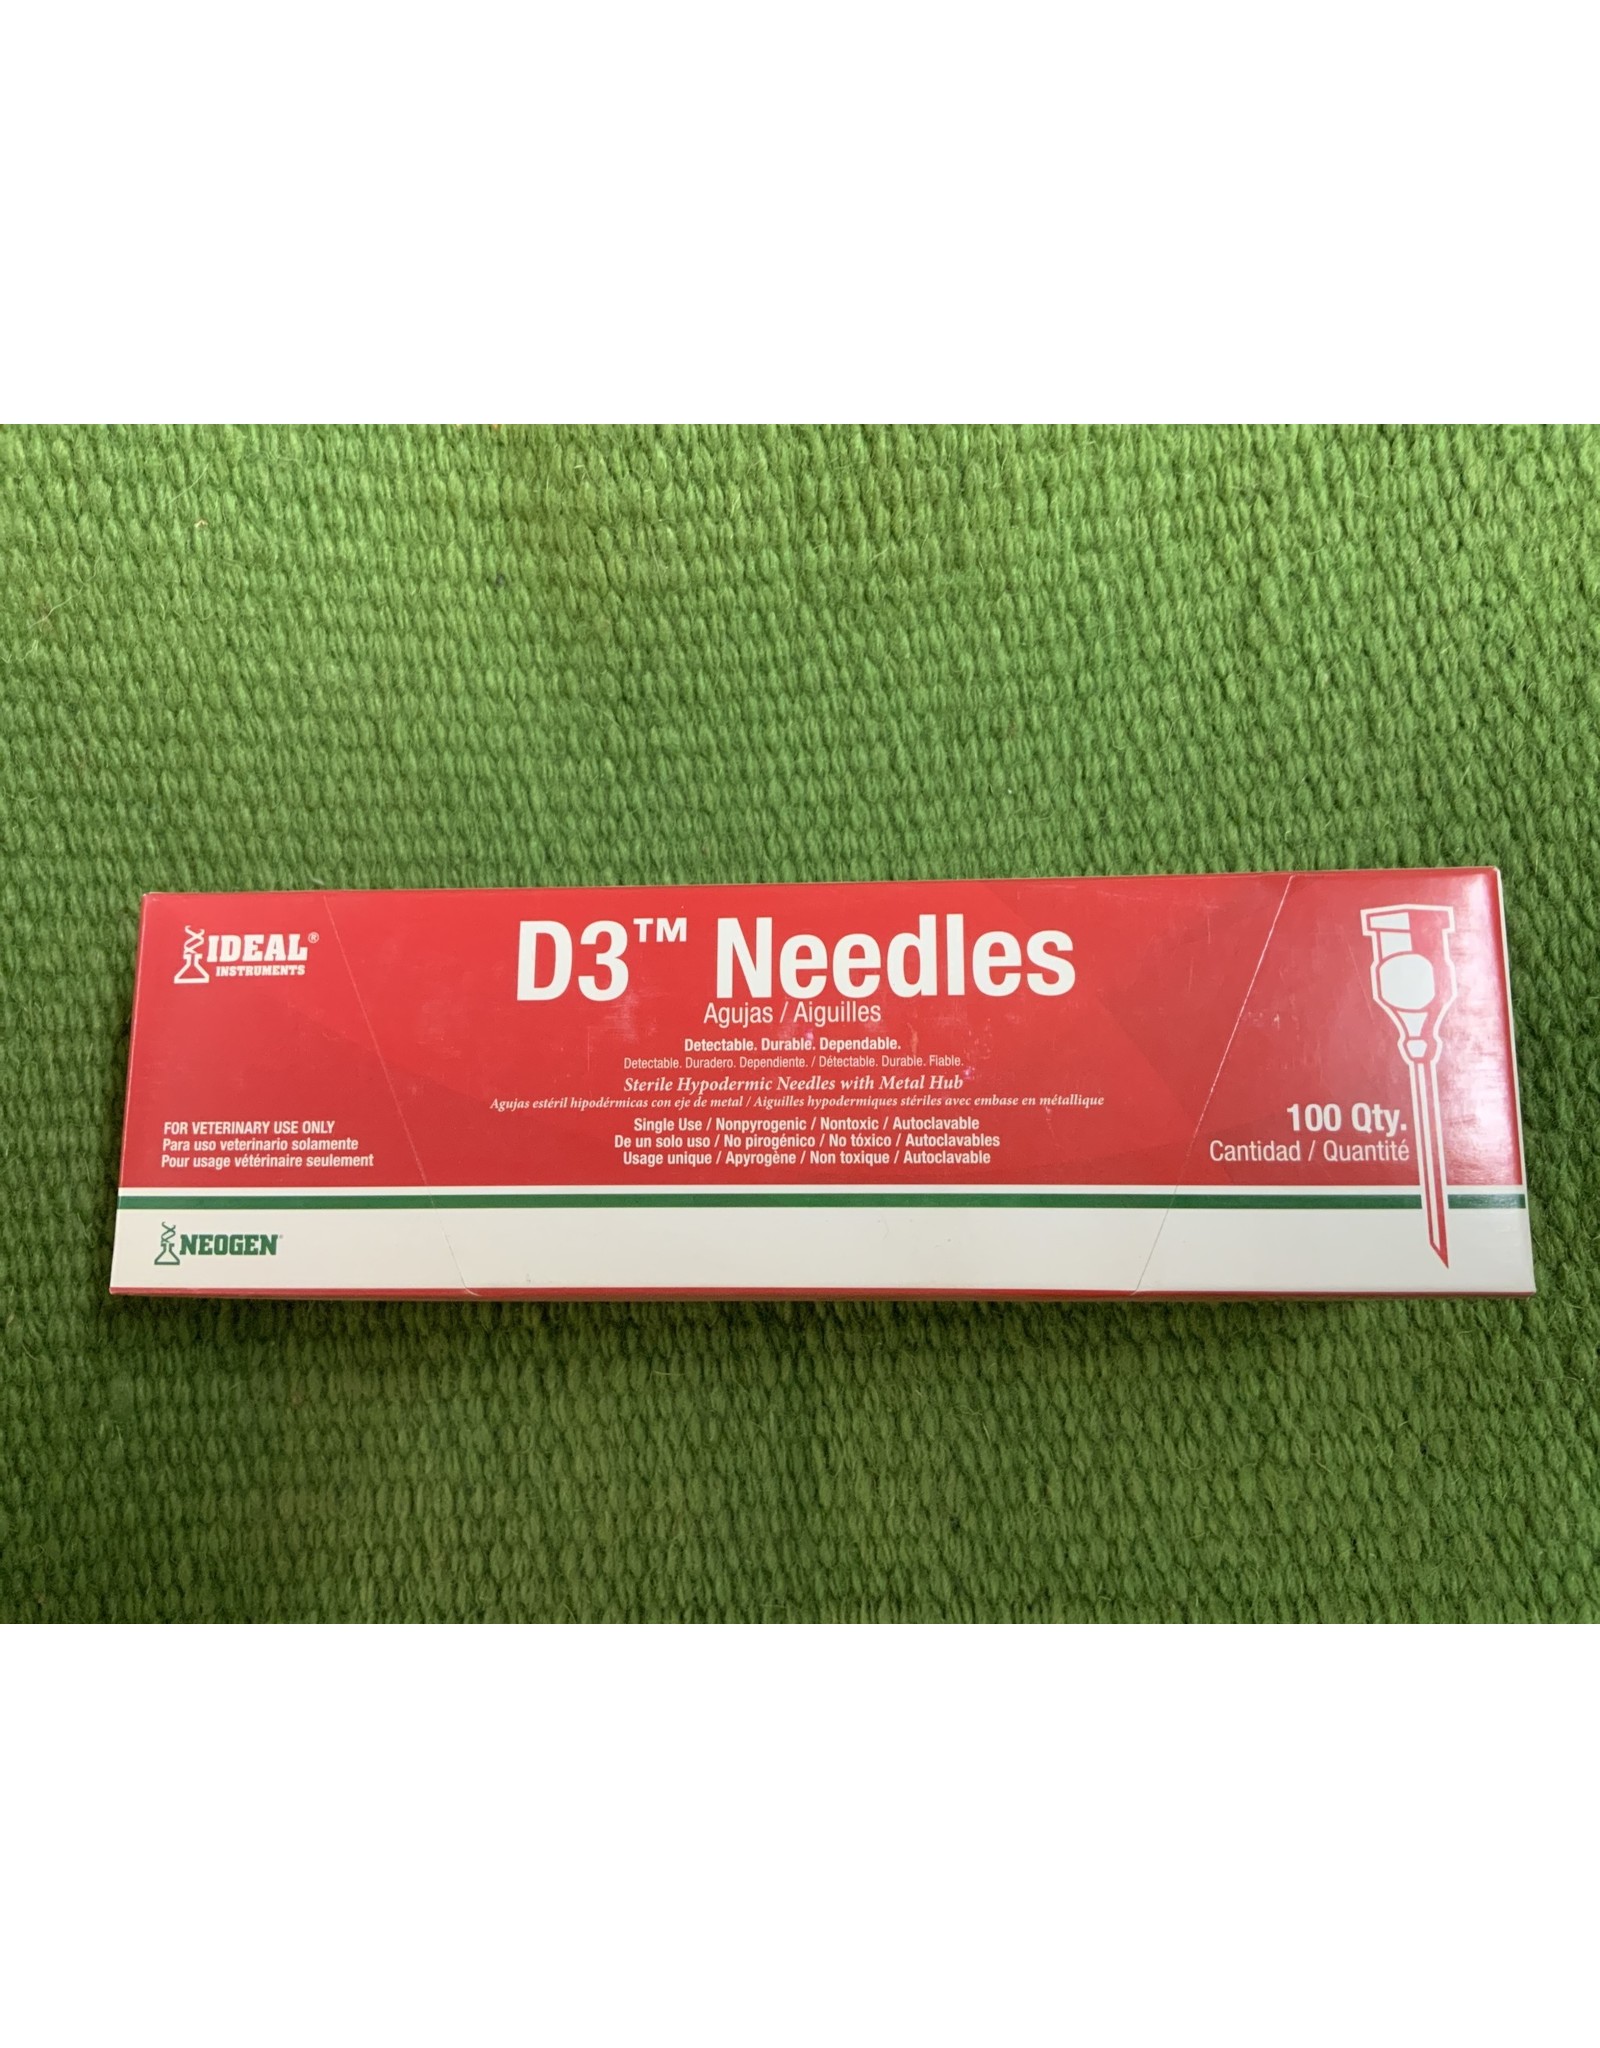 BOX NEEDLES* Ideal D3 Needle 18x3/4 100pk - 034-224  - These are detectible  so if they break they break in the animal they can be found - they are Aluminum and stronger then regular needles - they are a safety needle